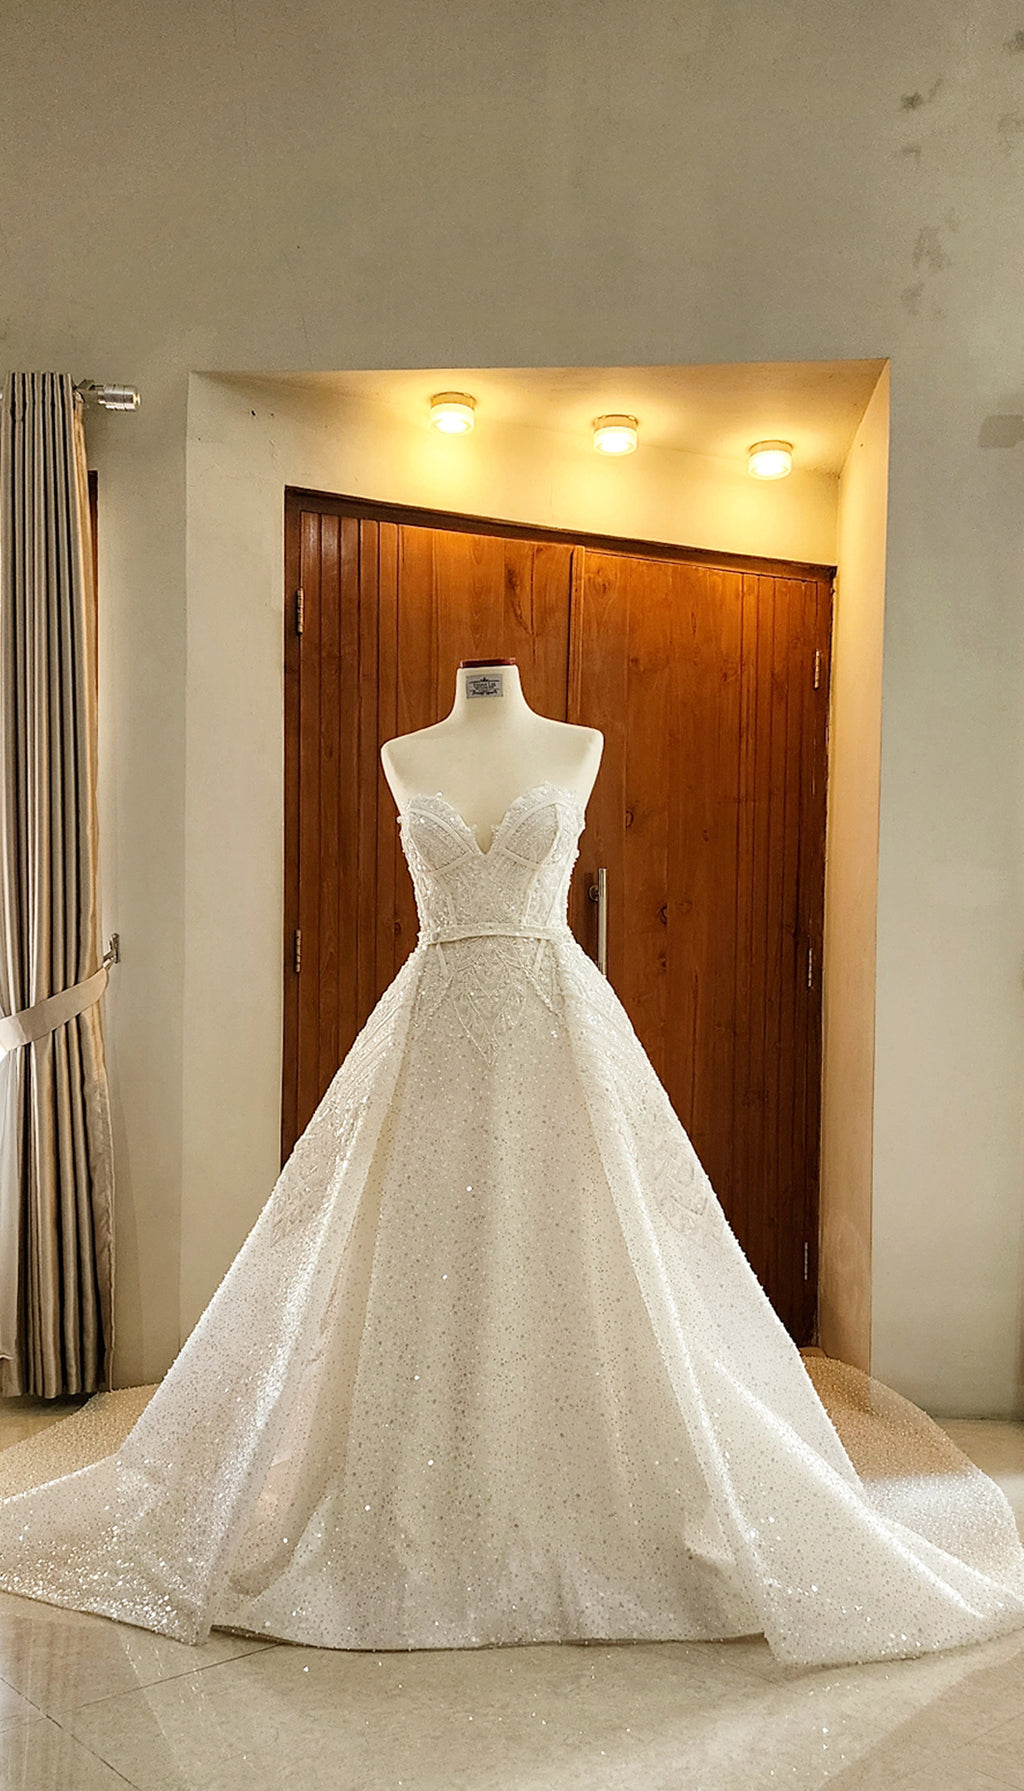 Yenny Lee Bridal Couture - Olive Wedding Dress